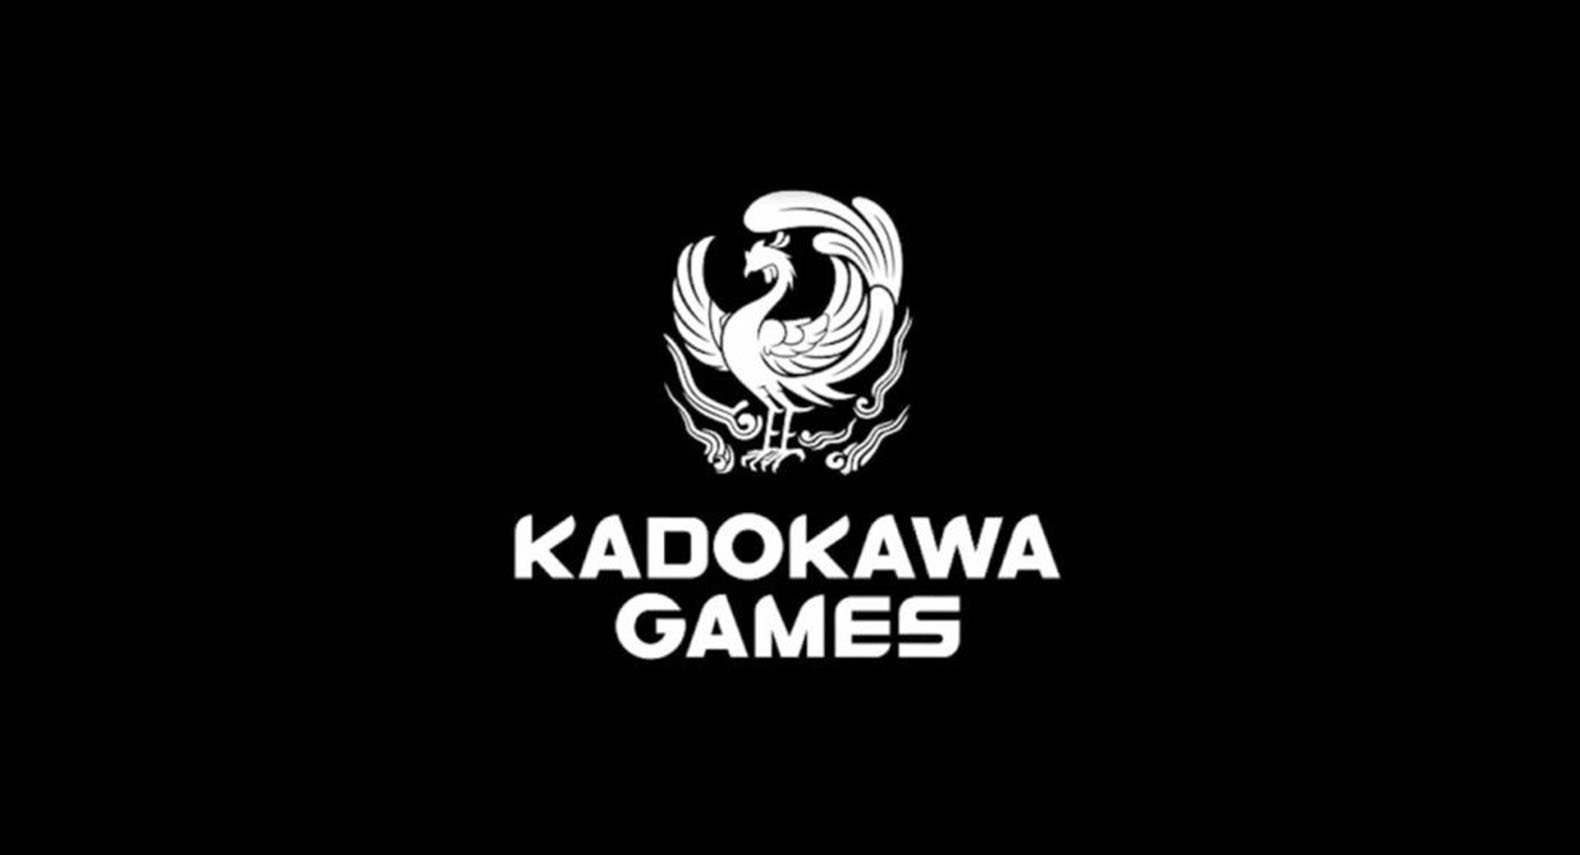 #
      Kadokawa Games to divest part of its business to Dragami Games, a new company established by Yoshimi Yasuda